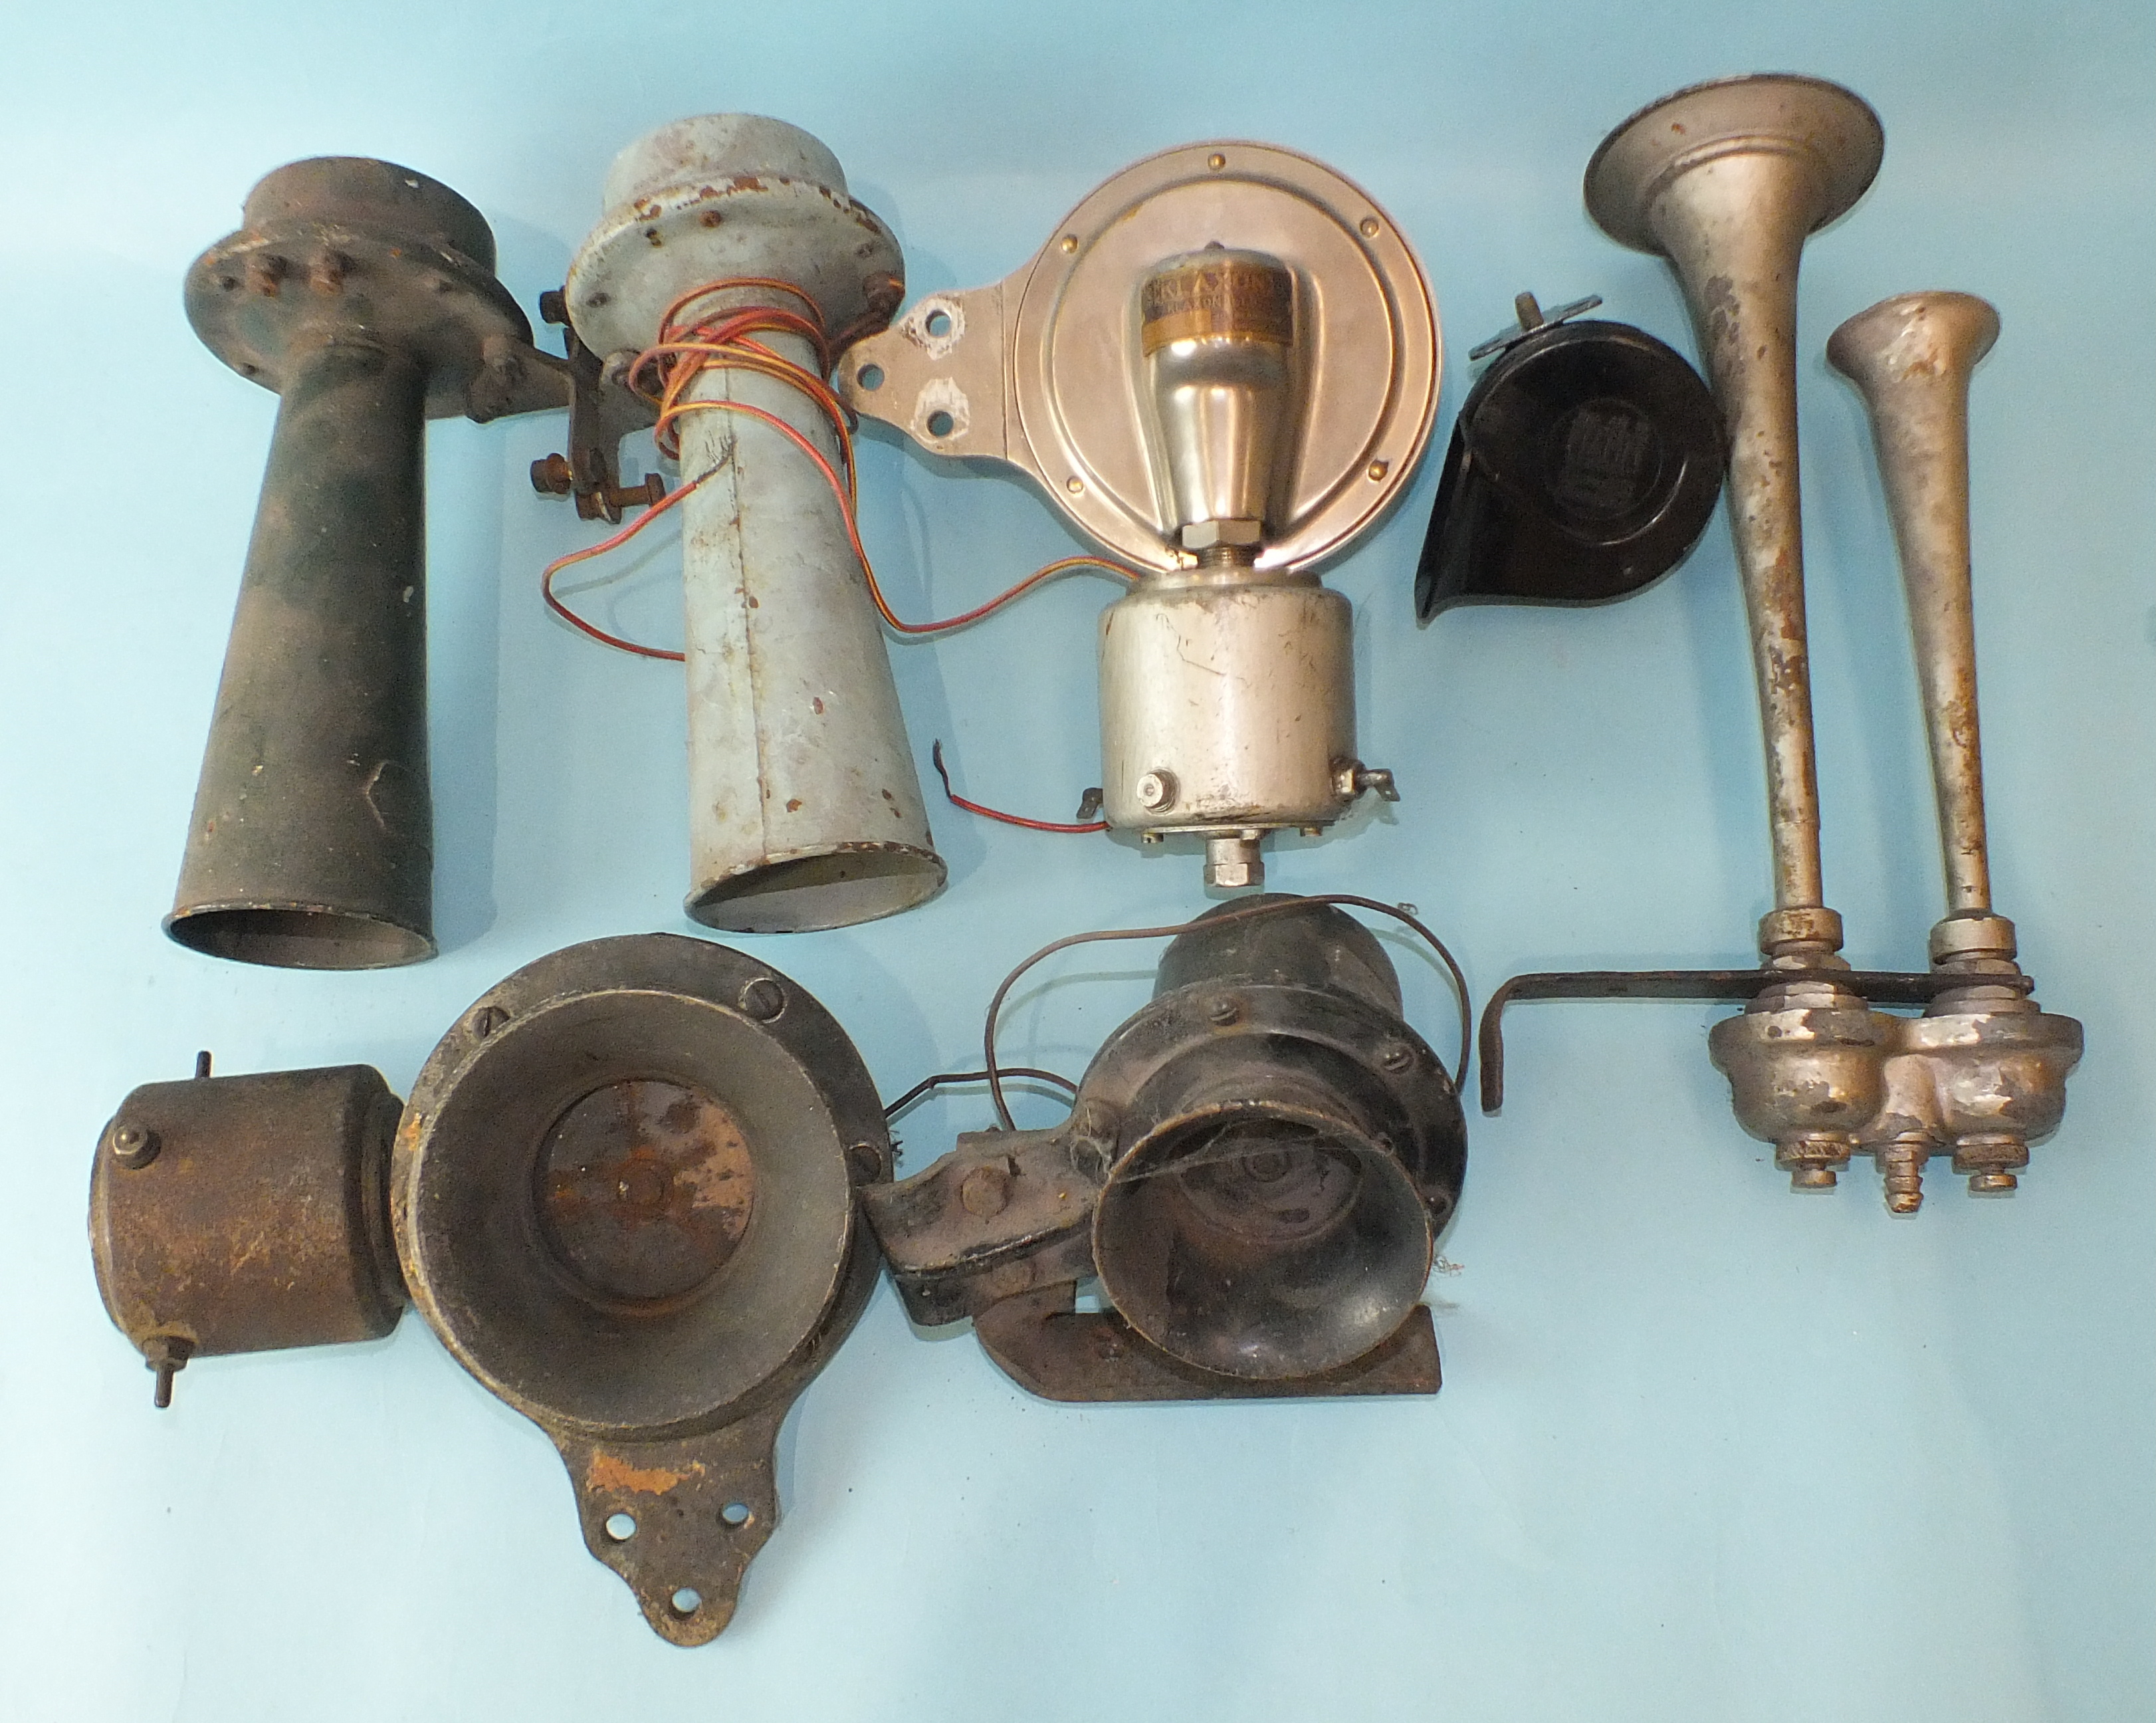 Three vintage Klaxon car horns and four others.